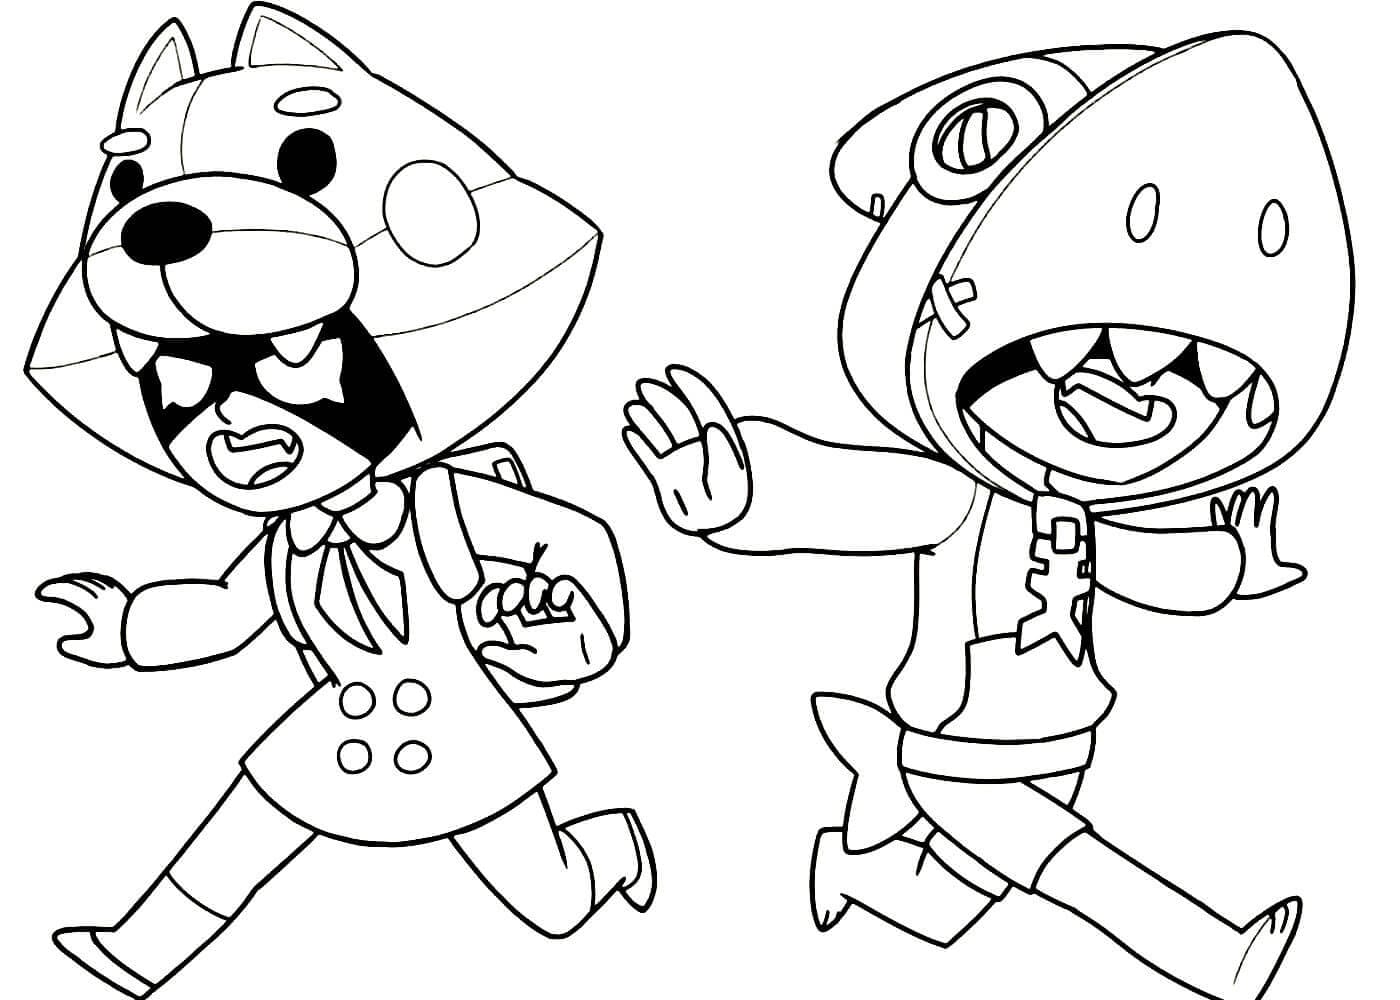 Leon Brawl Stars Coloring Pages Print For Free Wonder Day Coloring Pages For Children And Adults - brawl star leon colorir